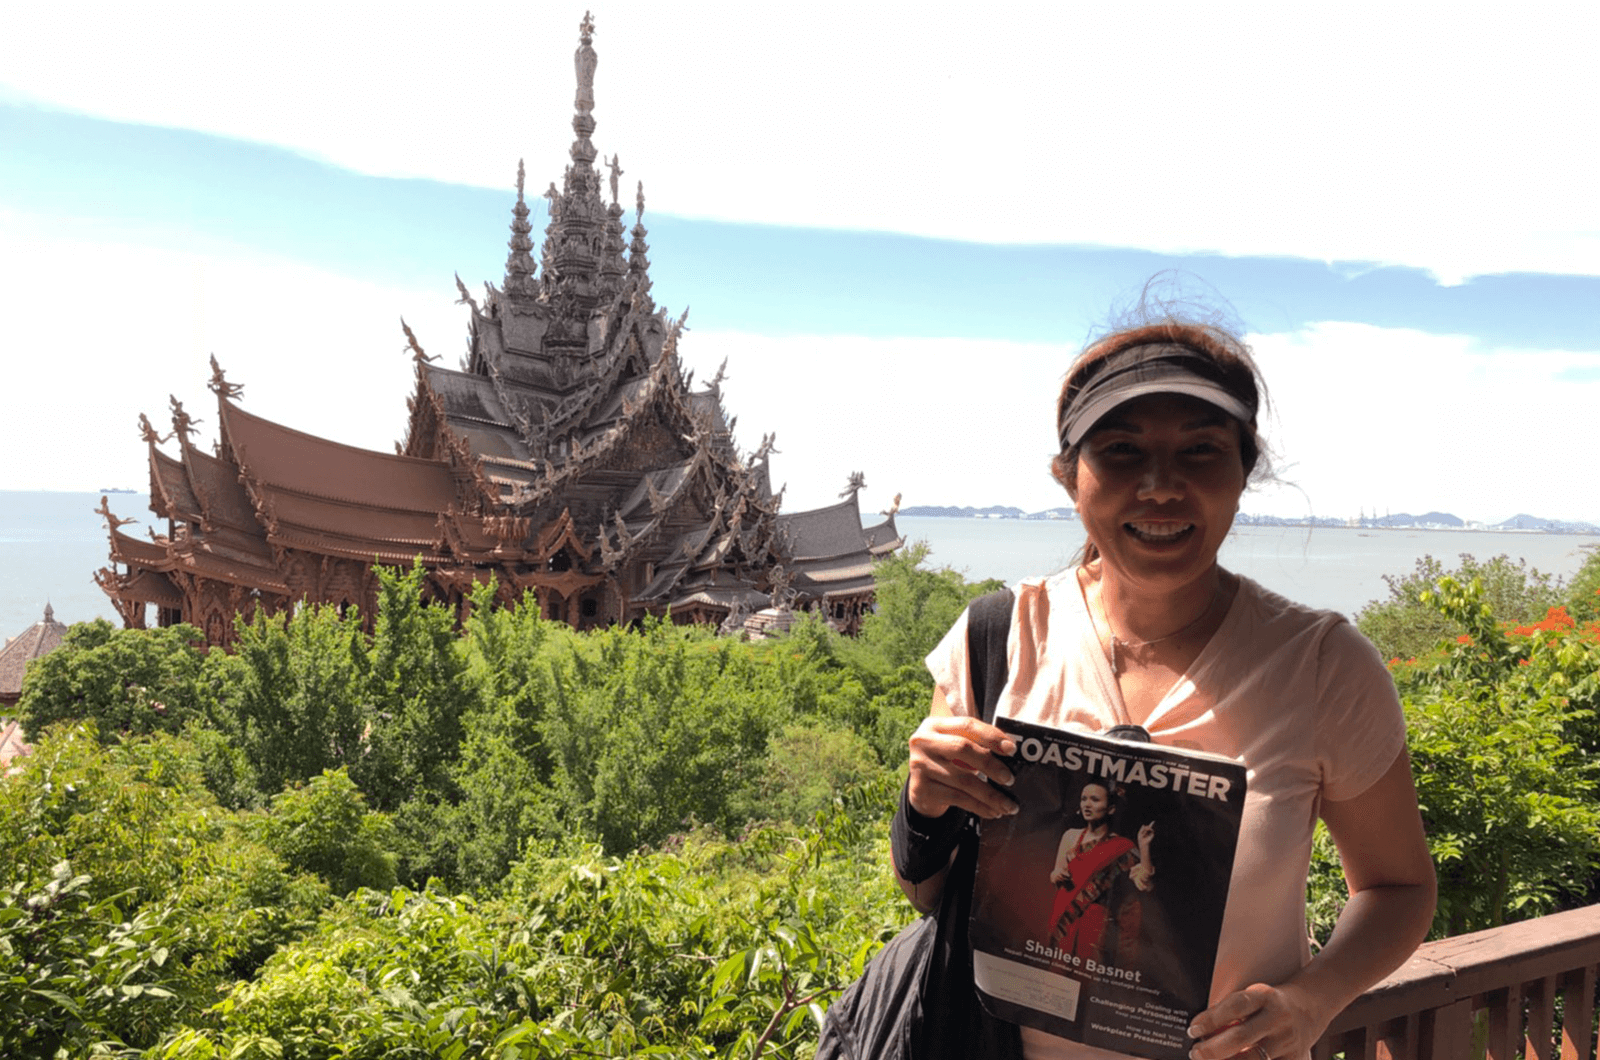 Keng Chester, of San Antonio, Texas, United States, visits a temple shrine in Thailand while on a trip through the country.